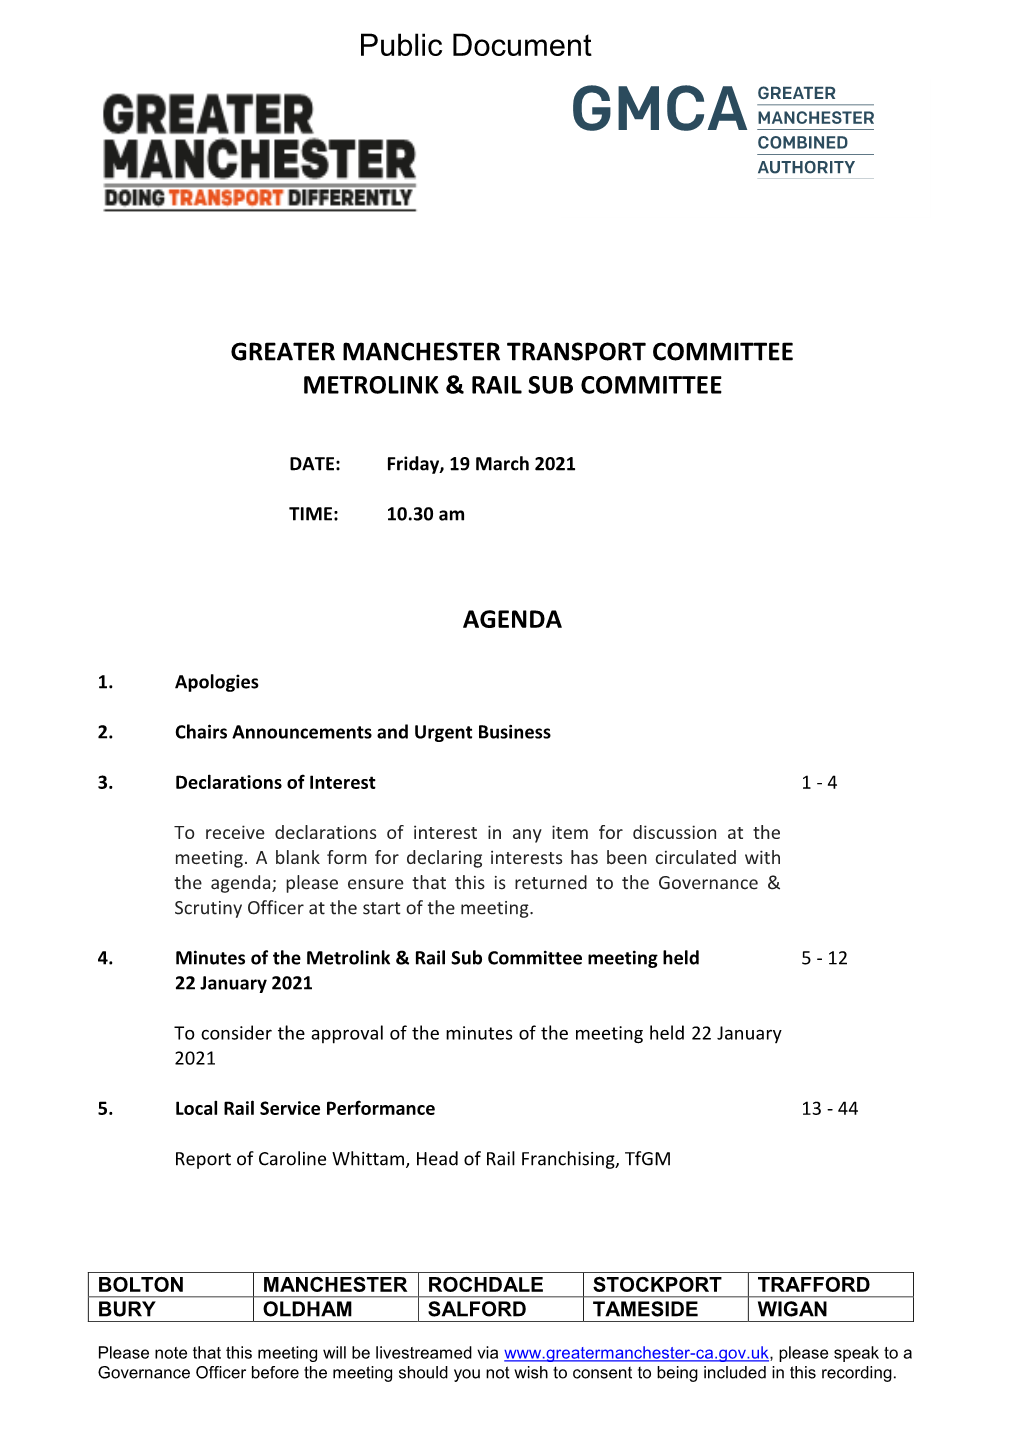 (Public Pack)Agenda Document for Greater Manchester Transport Committee, 19/03/2021 10:30